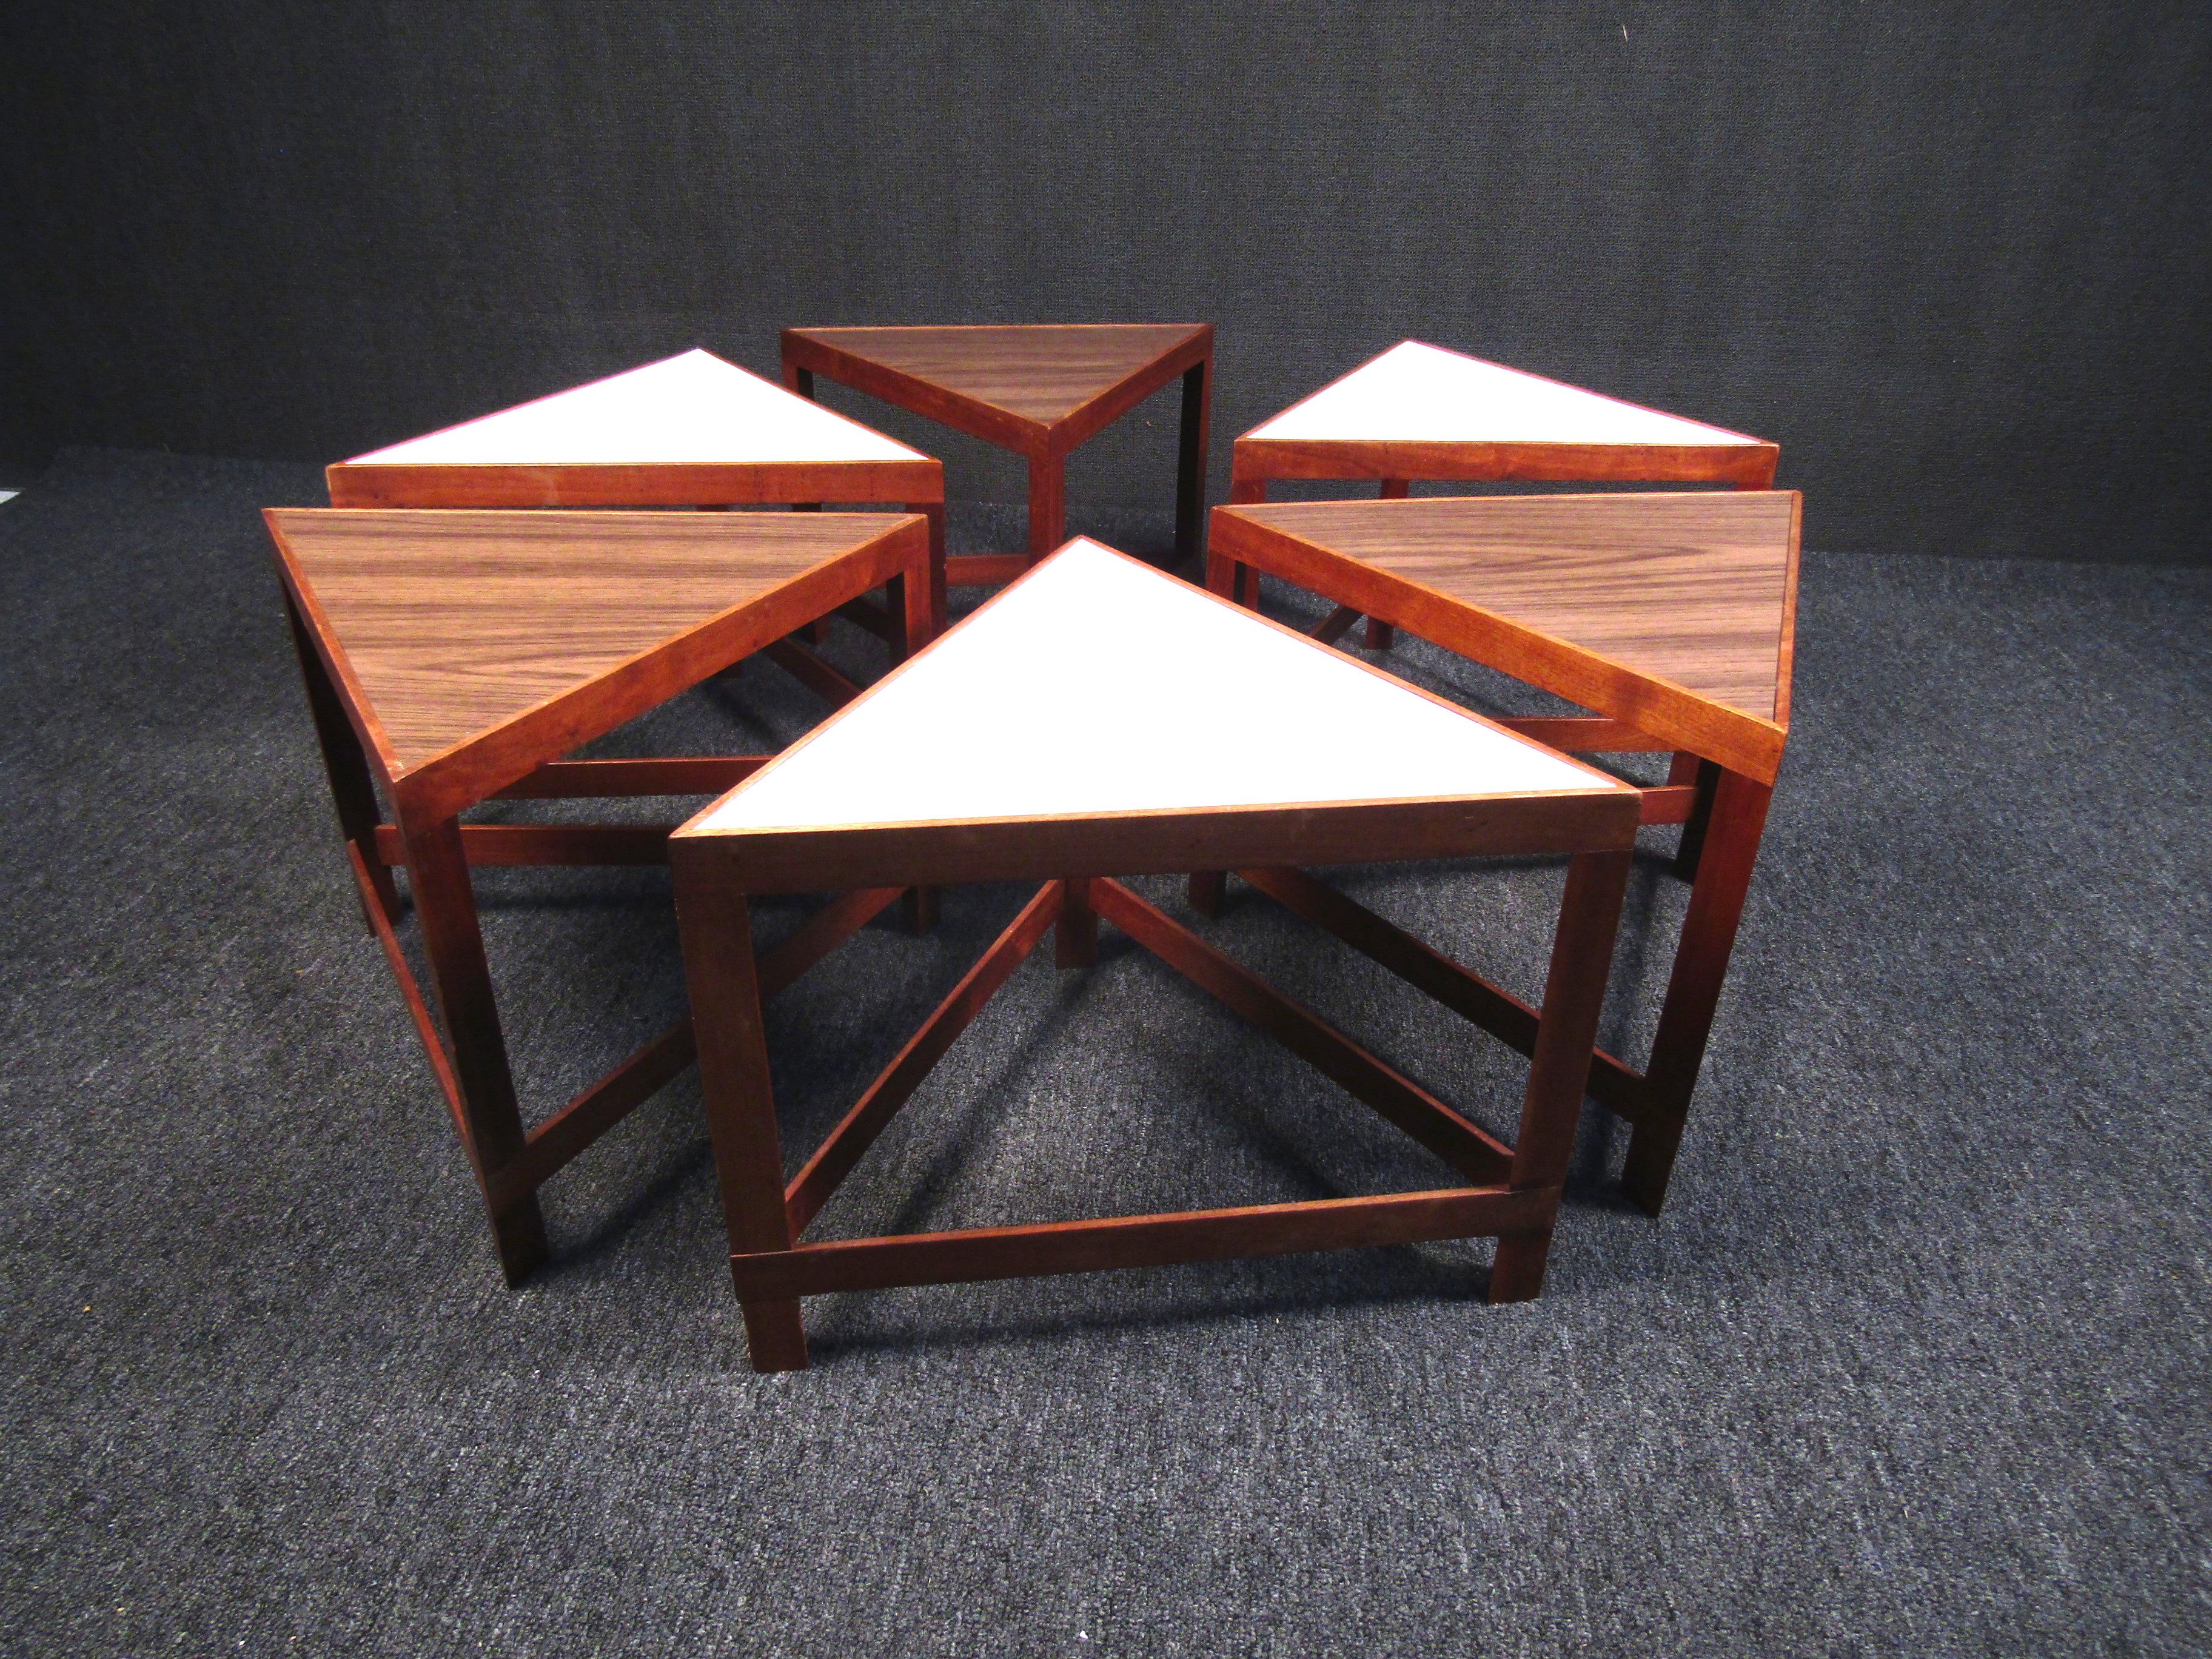 Very unusual Danish table - composed of 6 separate triangular sections which when arranged together create a hexagonal coffee table. A unique piece sure to be an interesting addition to any modern interior. Please confirm item location with dealer